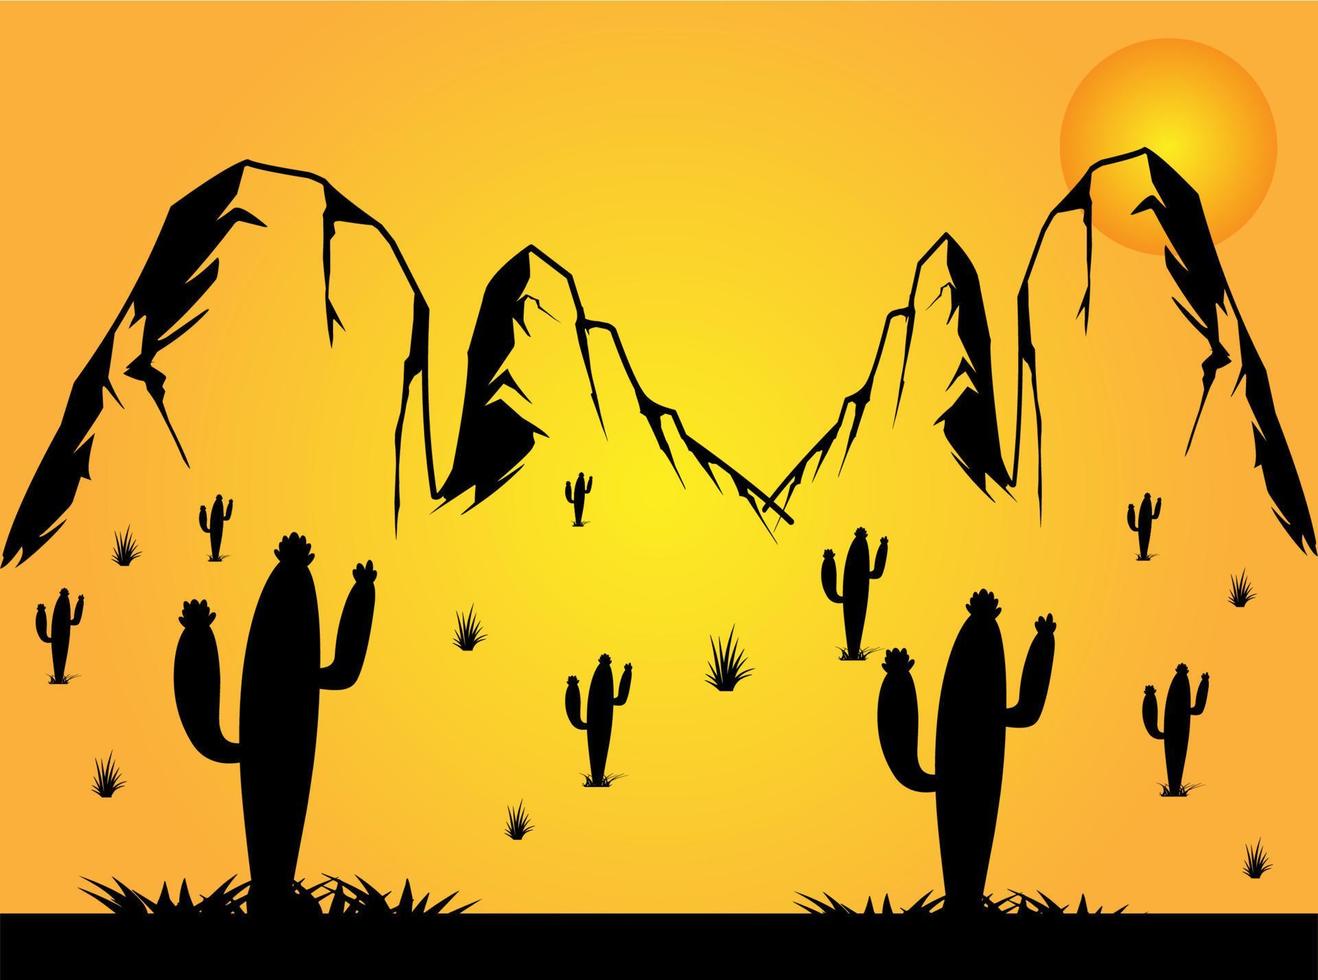 Landscape Desert on Sunset with Cactus Silhouette Illustrations vector